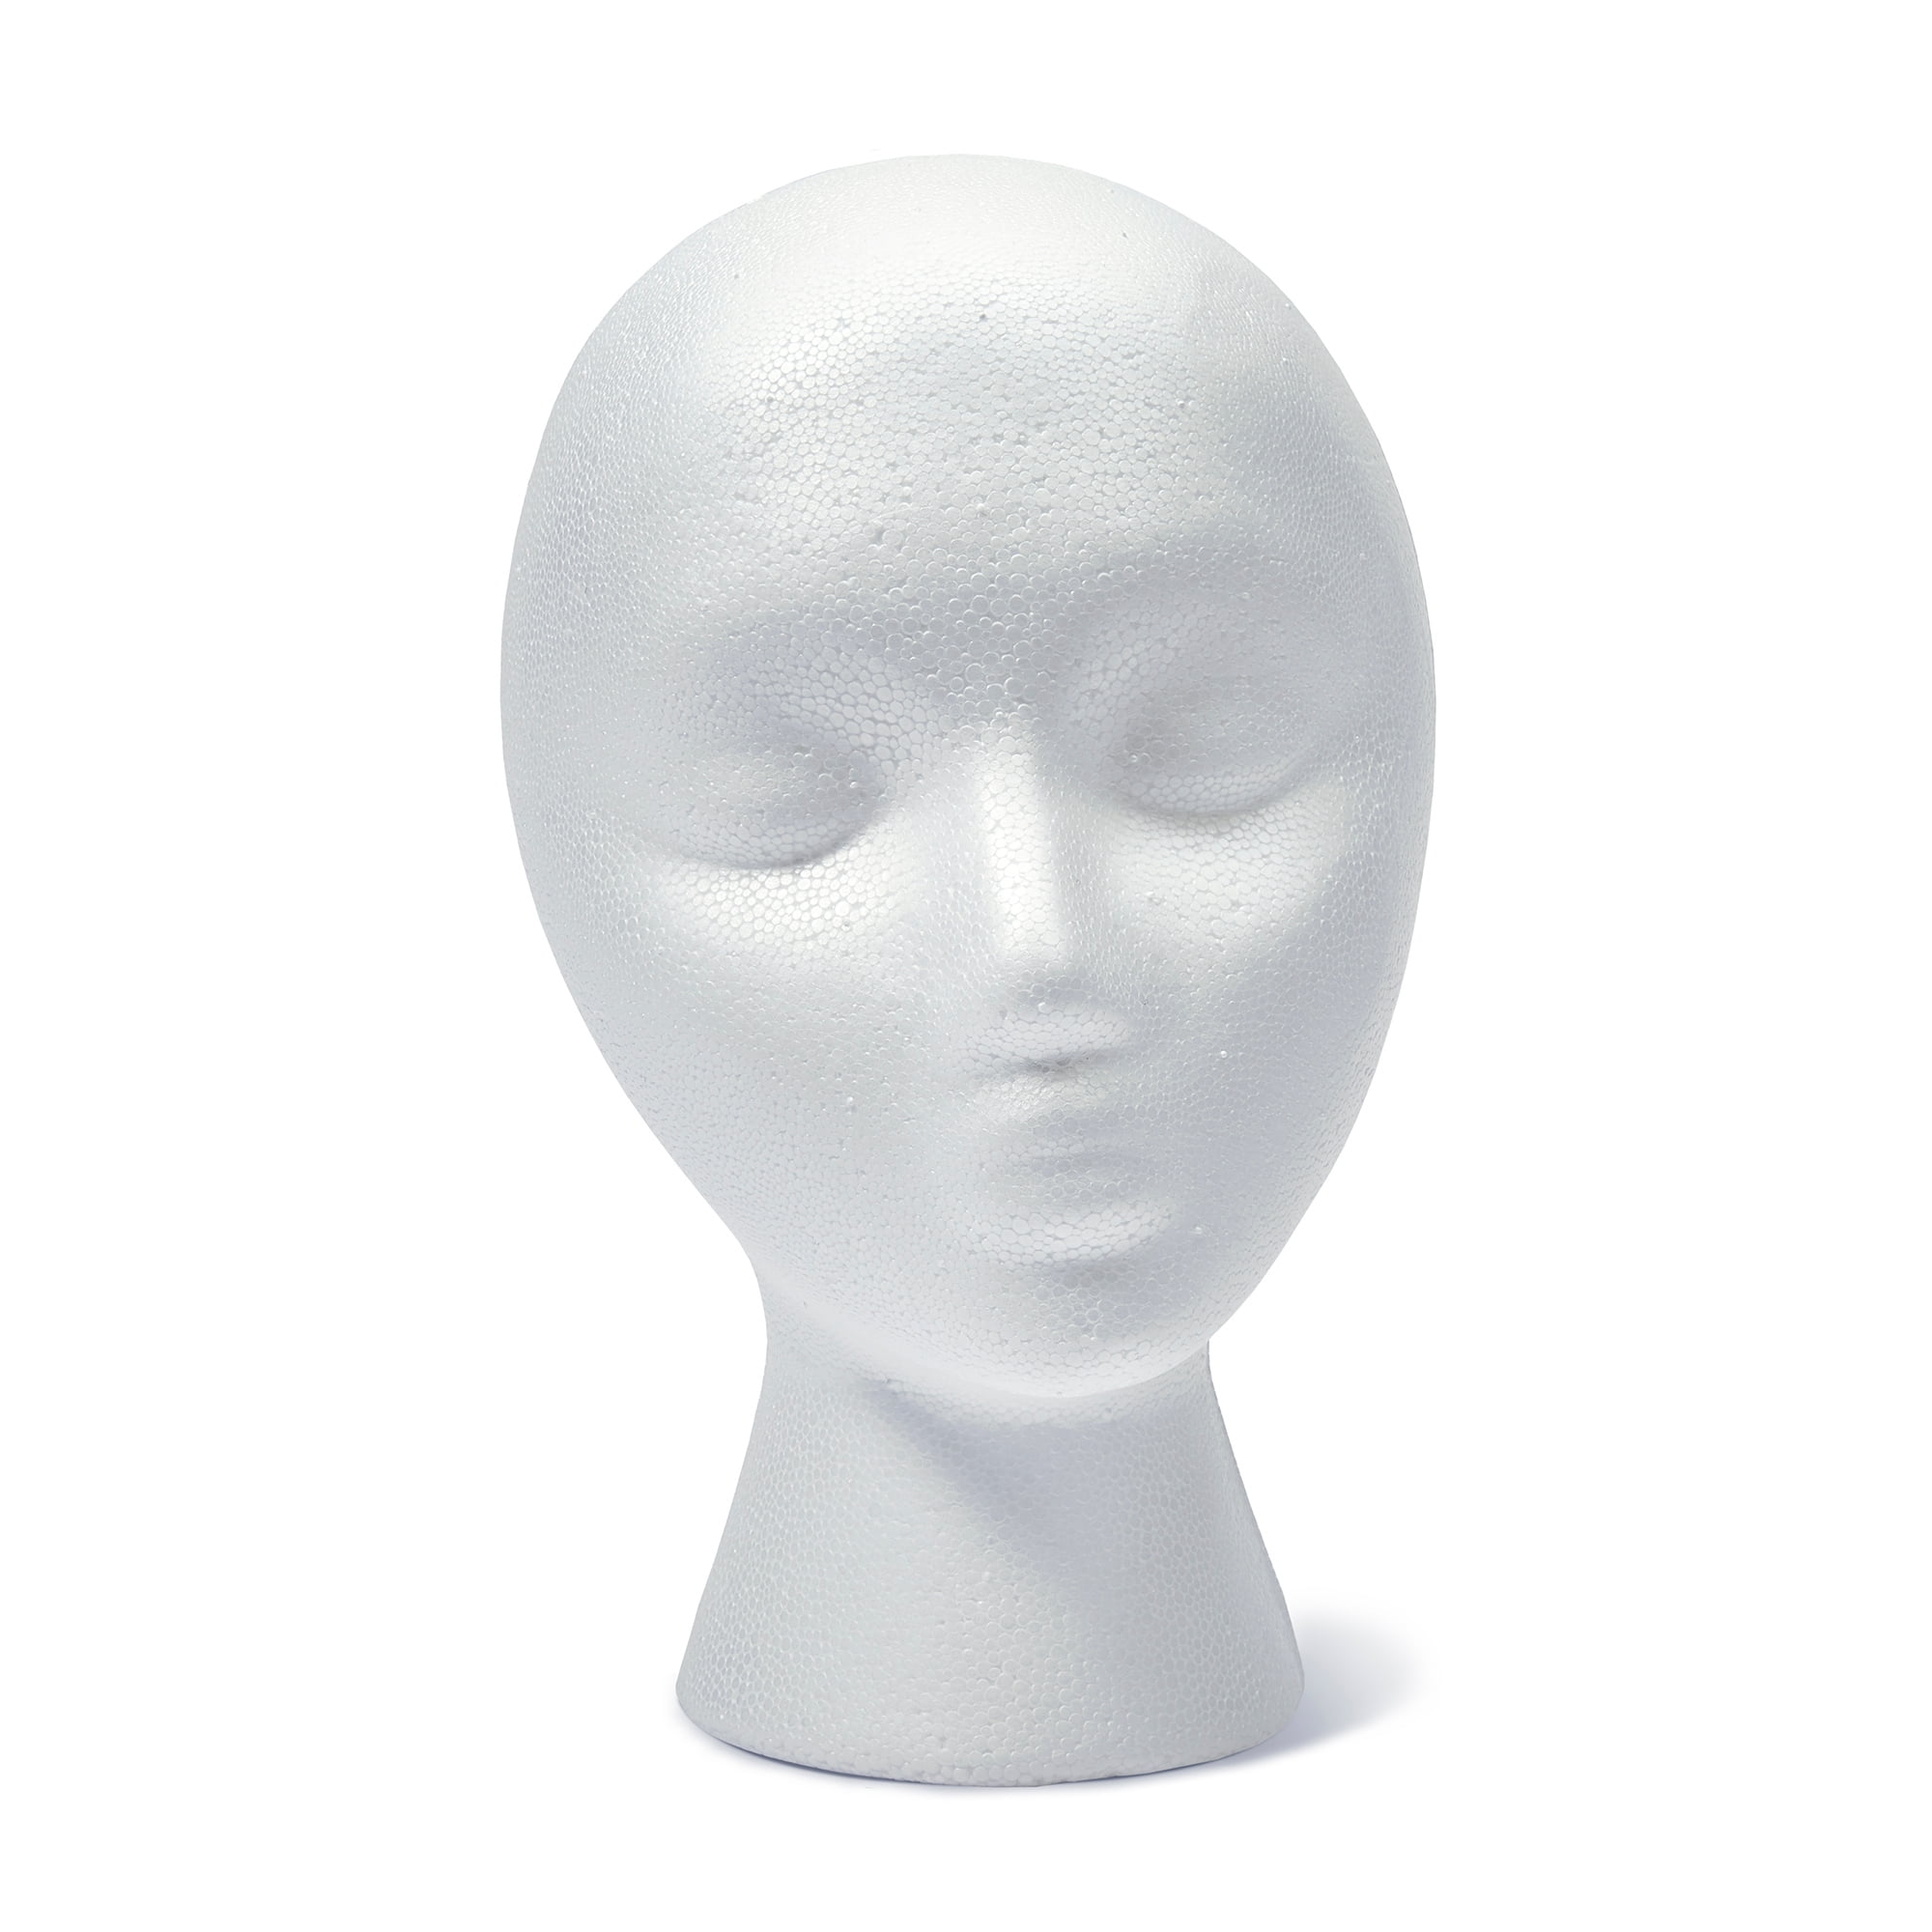 Bidbory 【US Warehouse, Fast Delivery】Mannequin Head, Foam